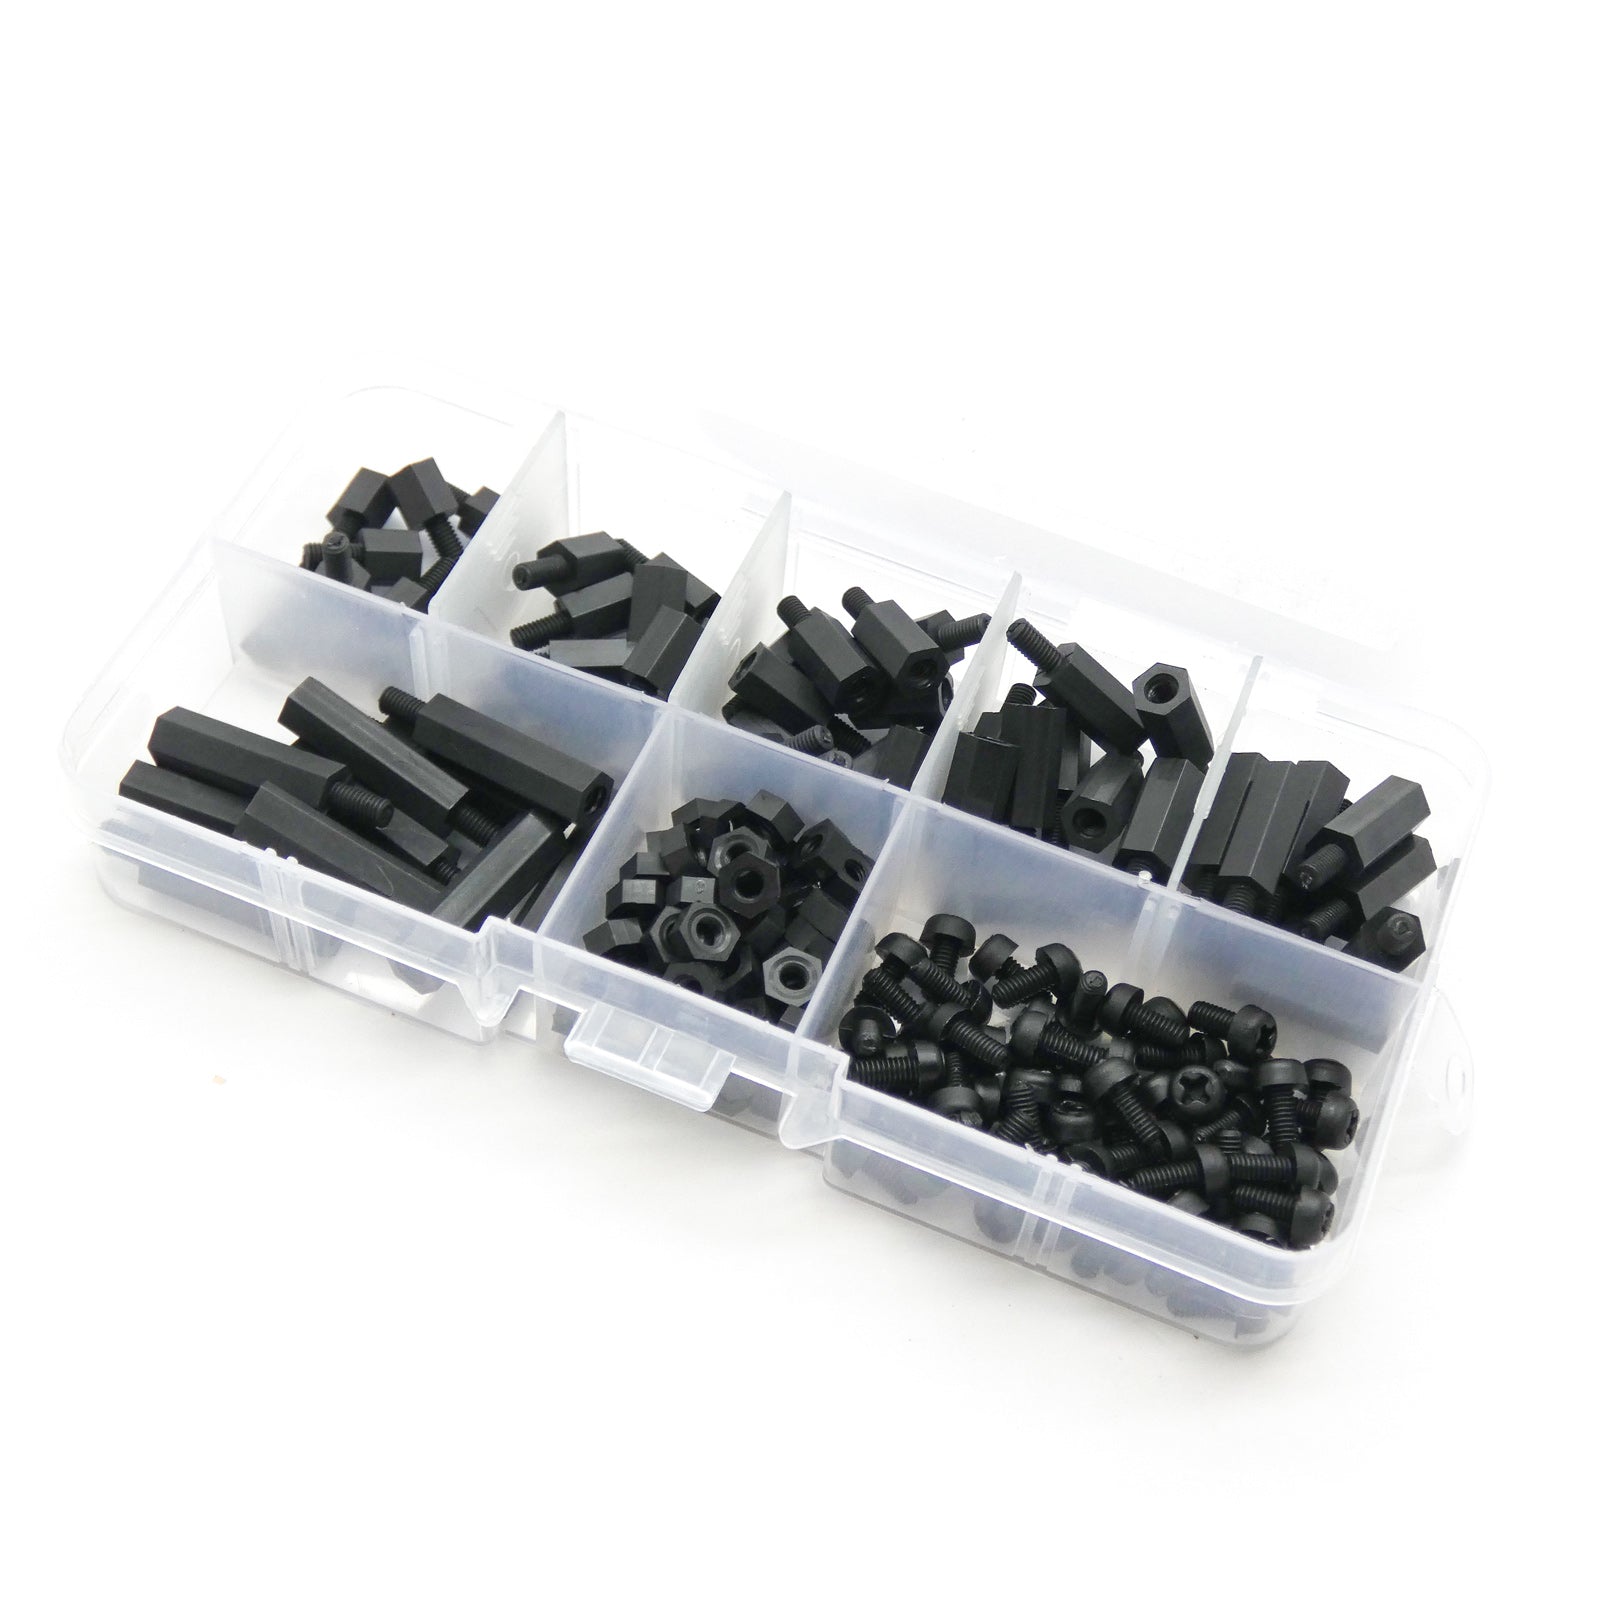 Nylon M3 Hex Standoff Kit with Screws Nuts and Spacers (Black / 180pcs